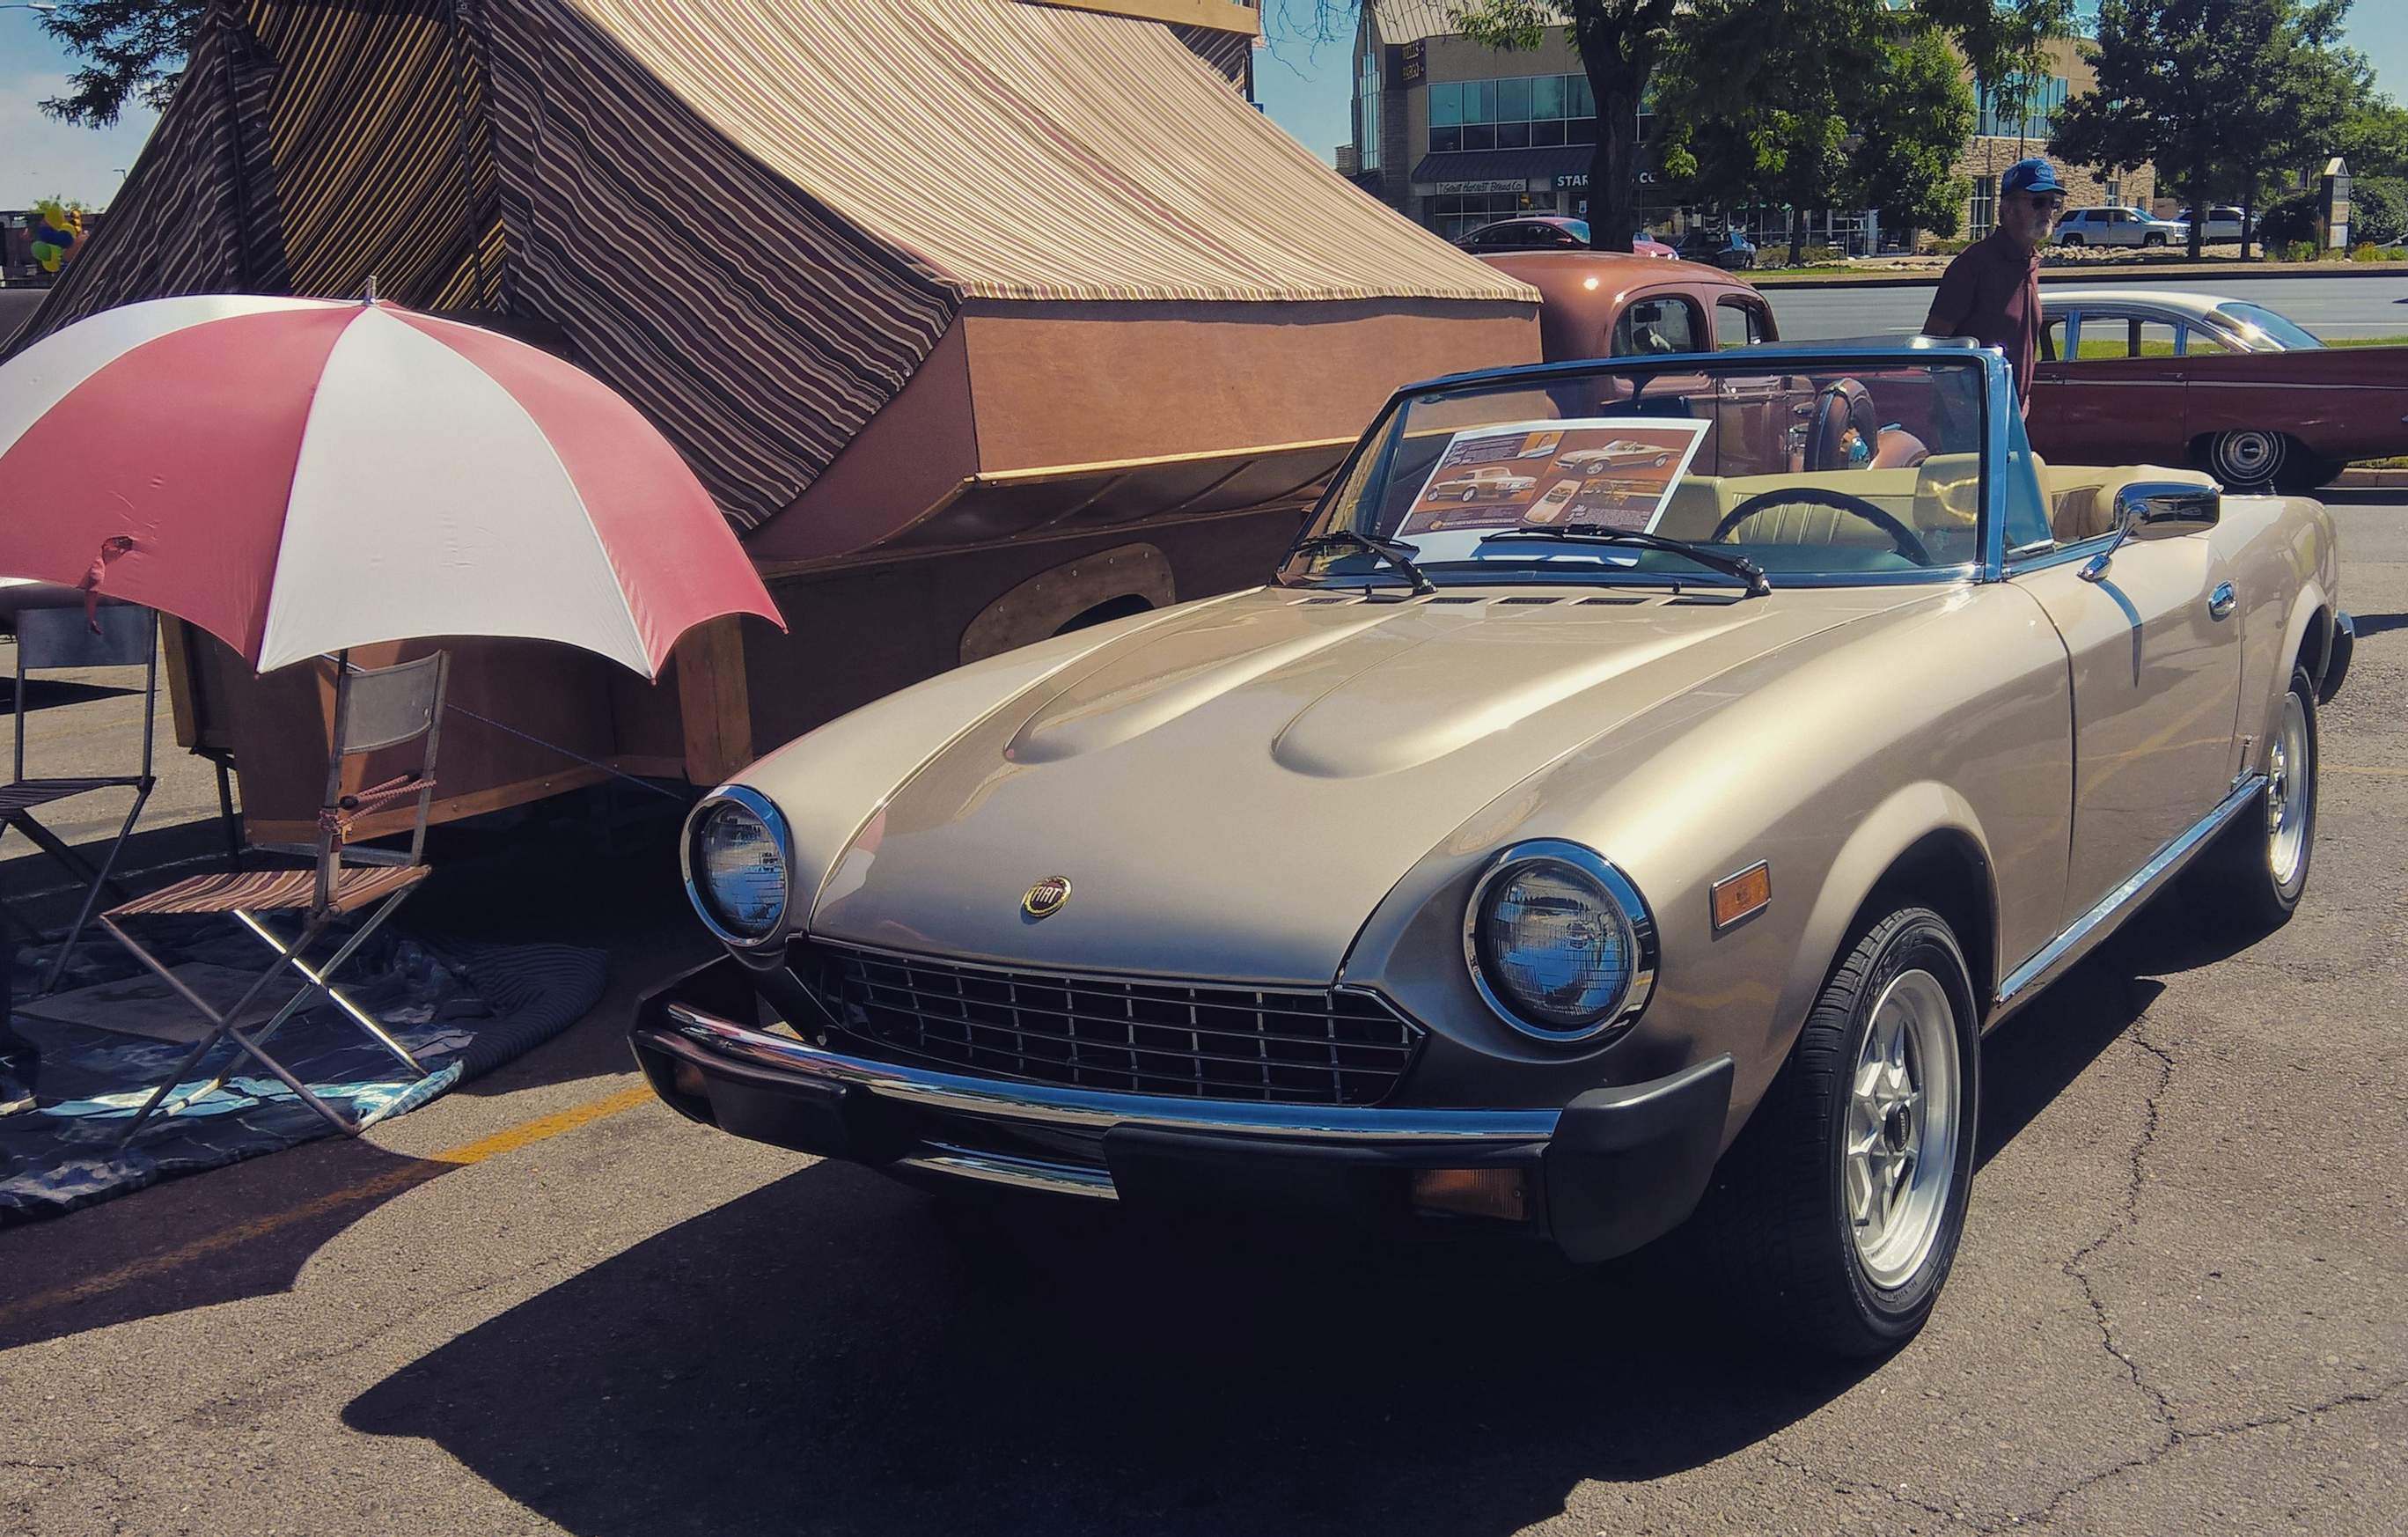 Gary's 1980 Fiat Spider (built in 1981)---#500 of 1000 Aanniversary Editions made.